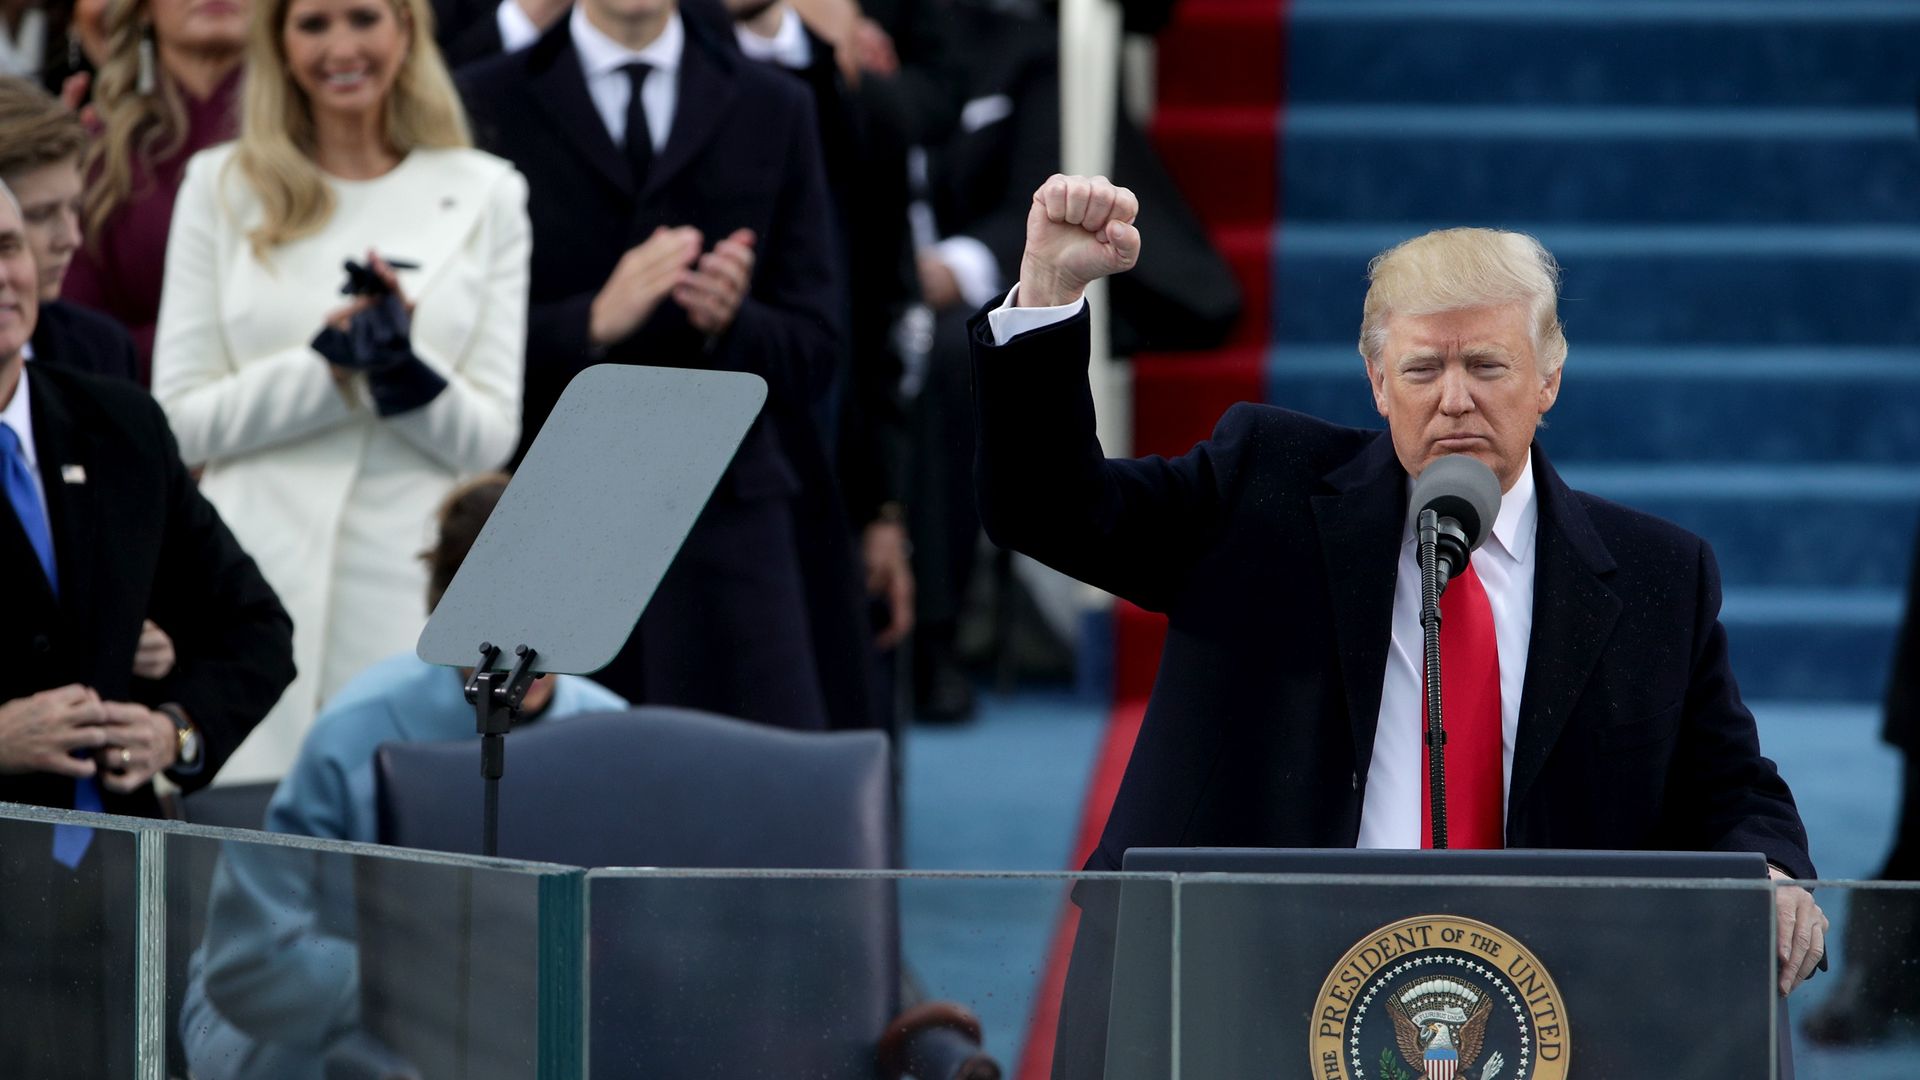 Former President Trump during his inauguration in January 2017.